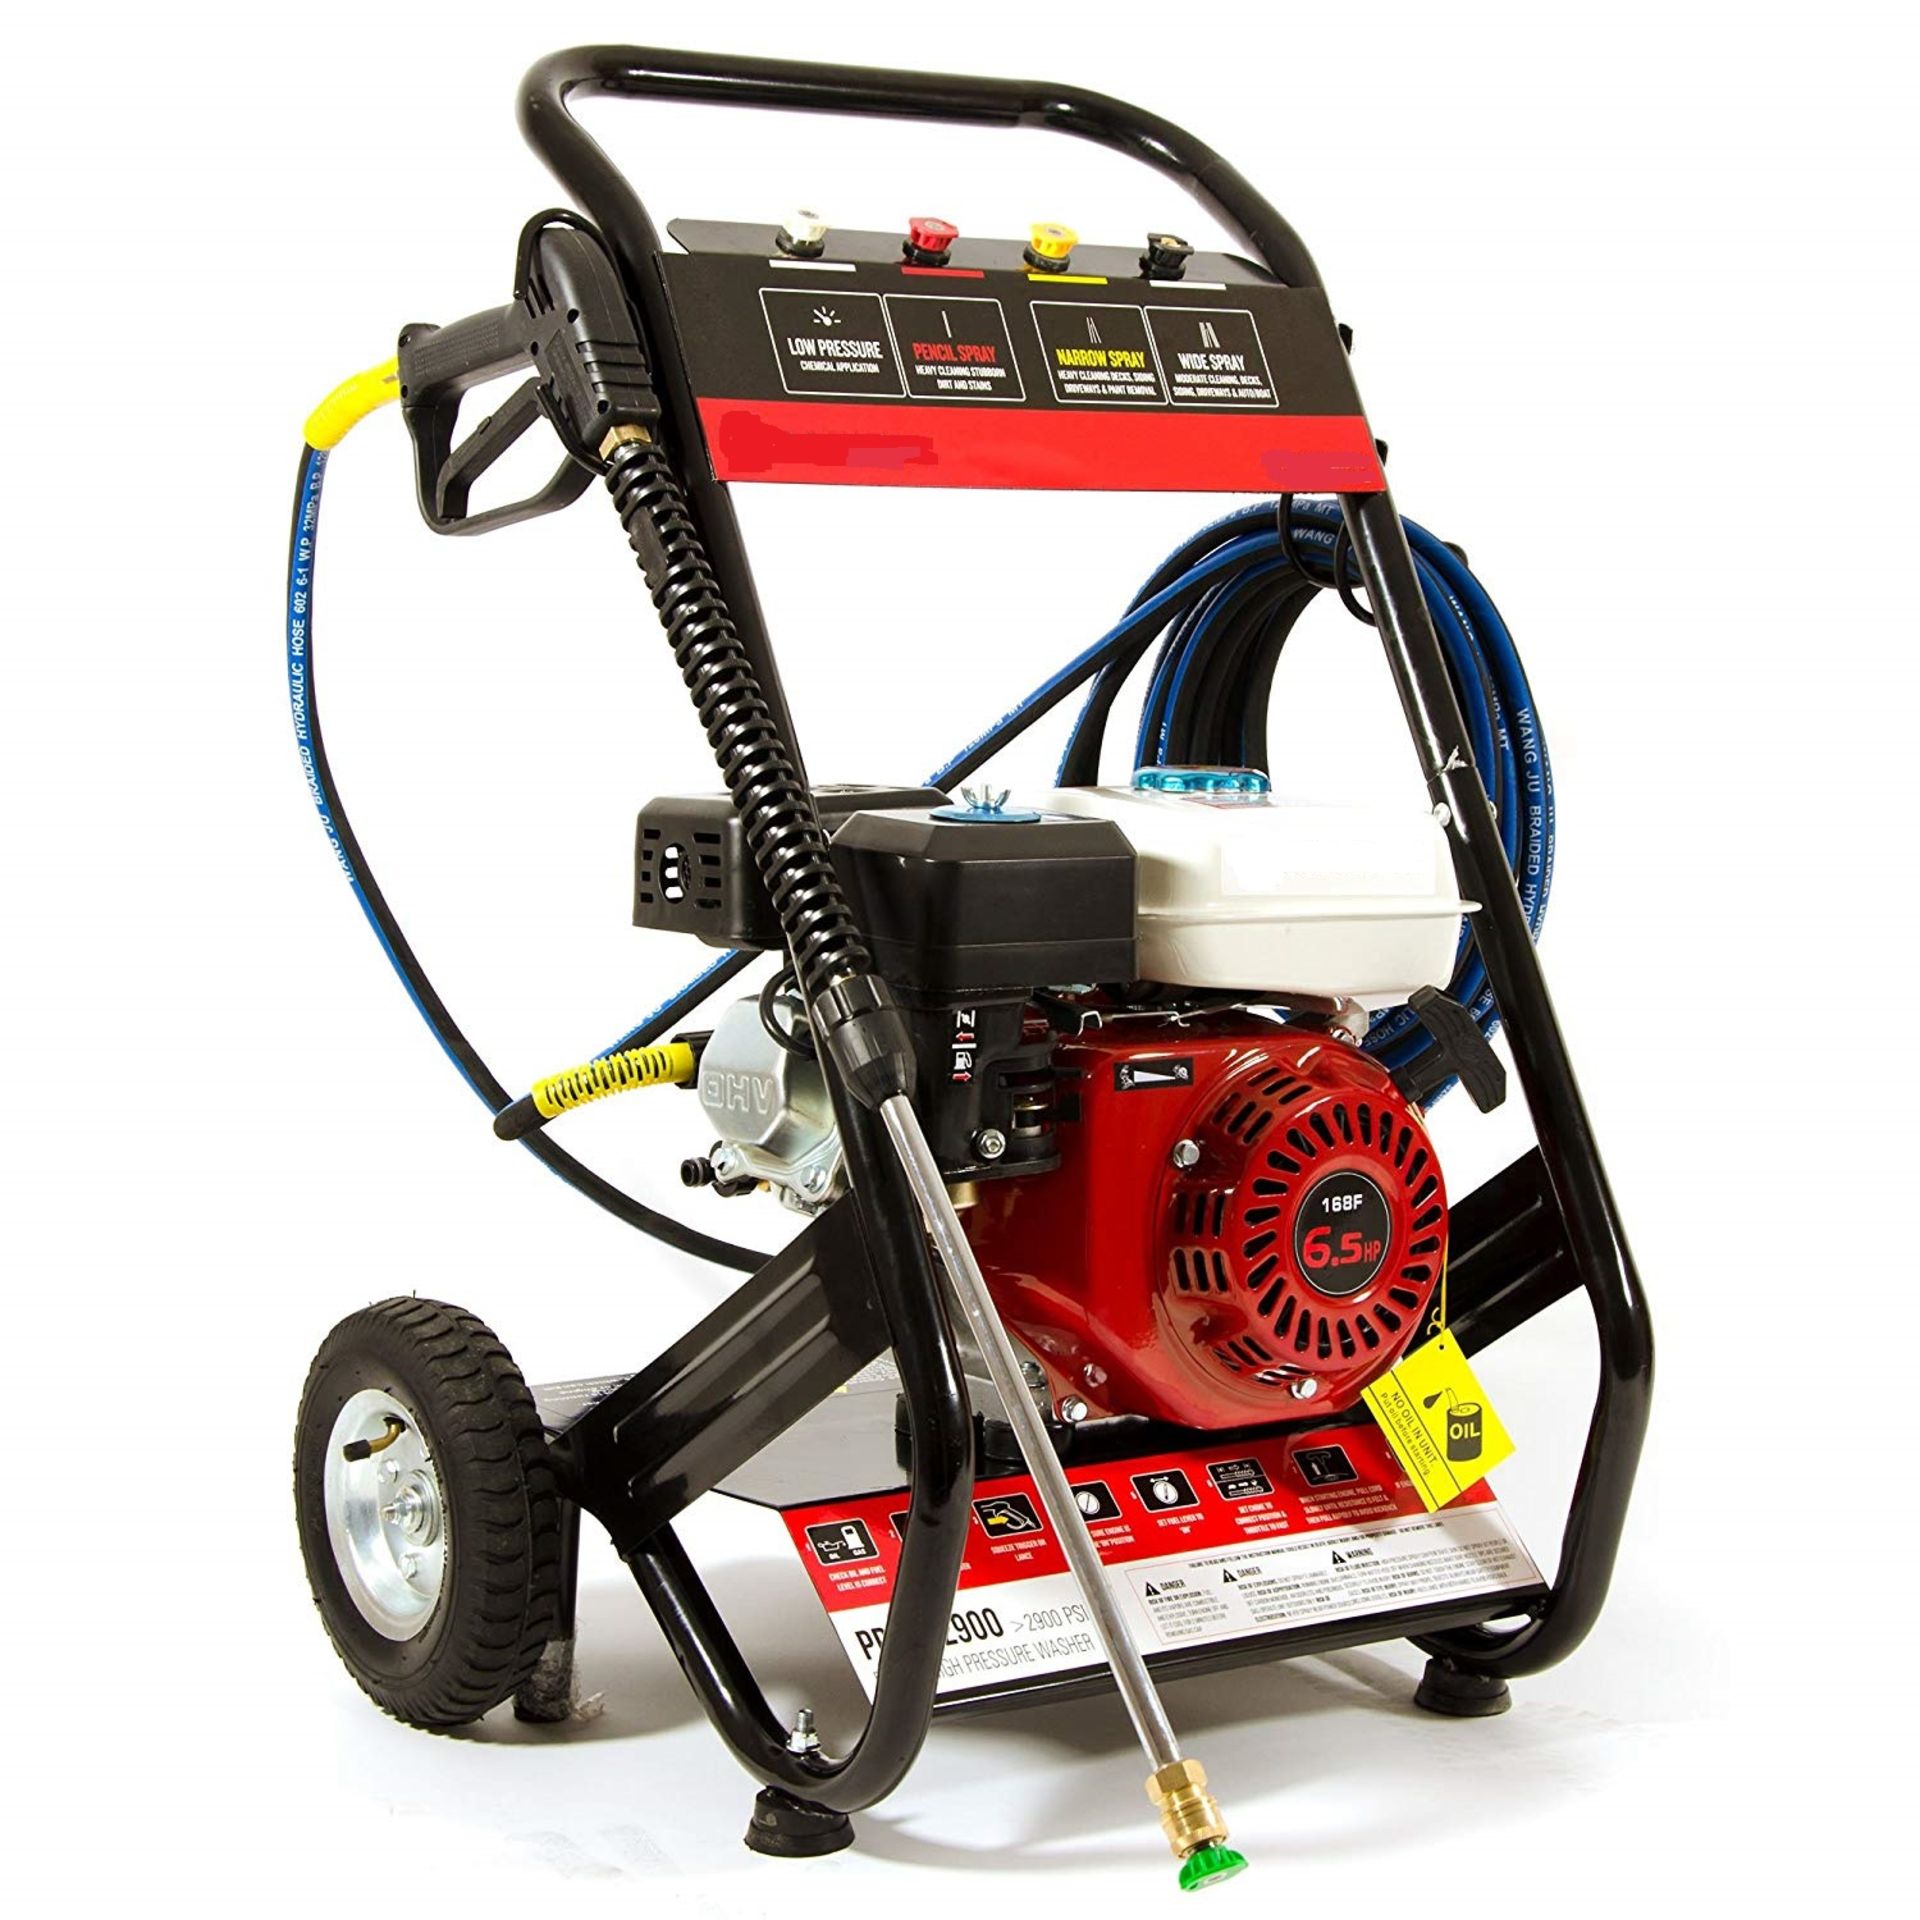 + VAT Brand New Pressure Washer With Petrol Engine 3000PSI - 3GPM Flow Rate ISP £219.99 (Parker) (